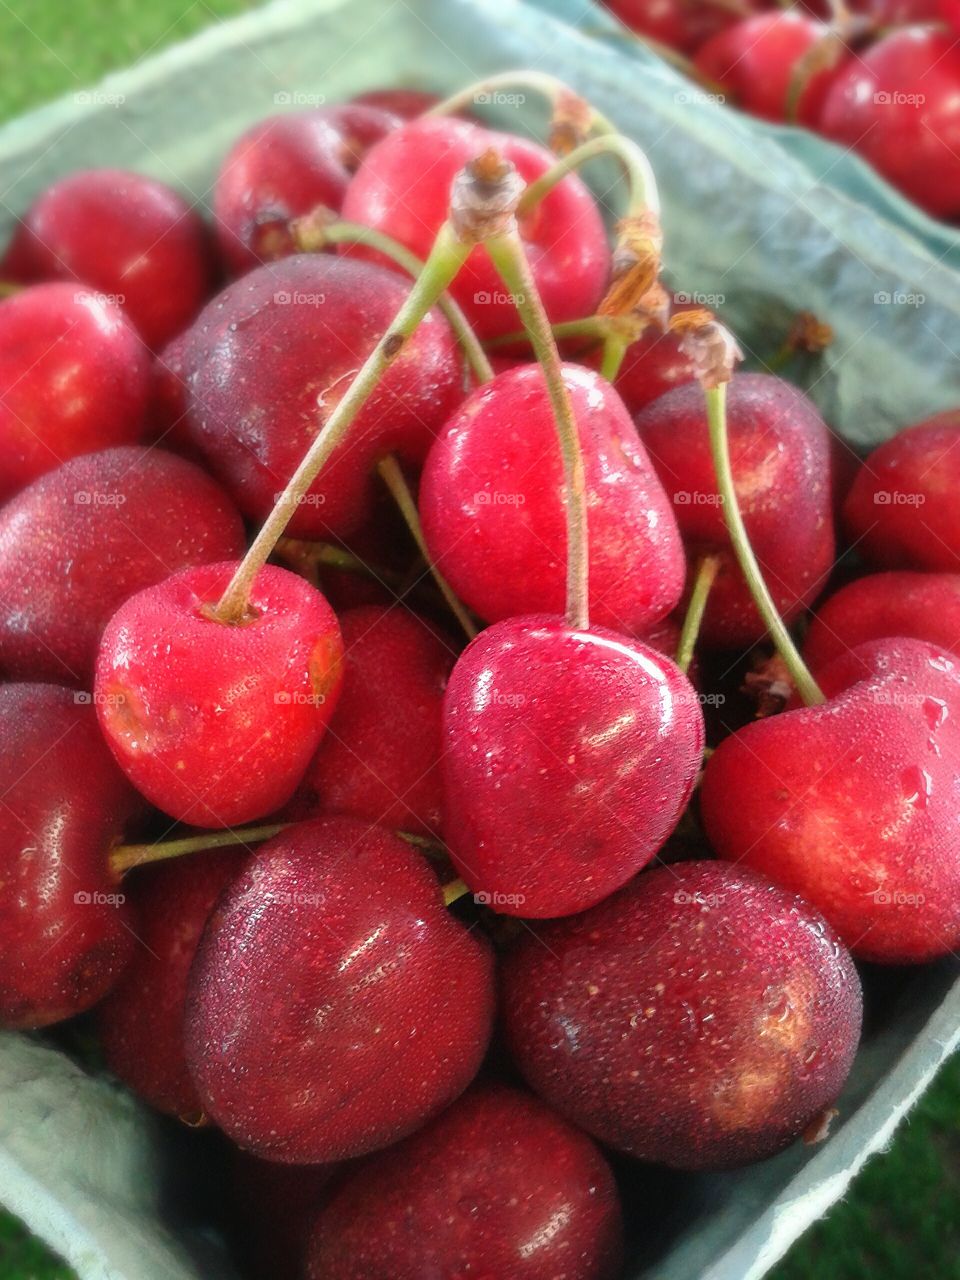 Market cherries. You will not believe how good they are.